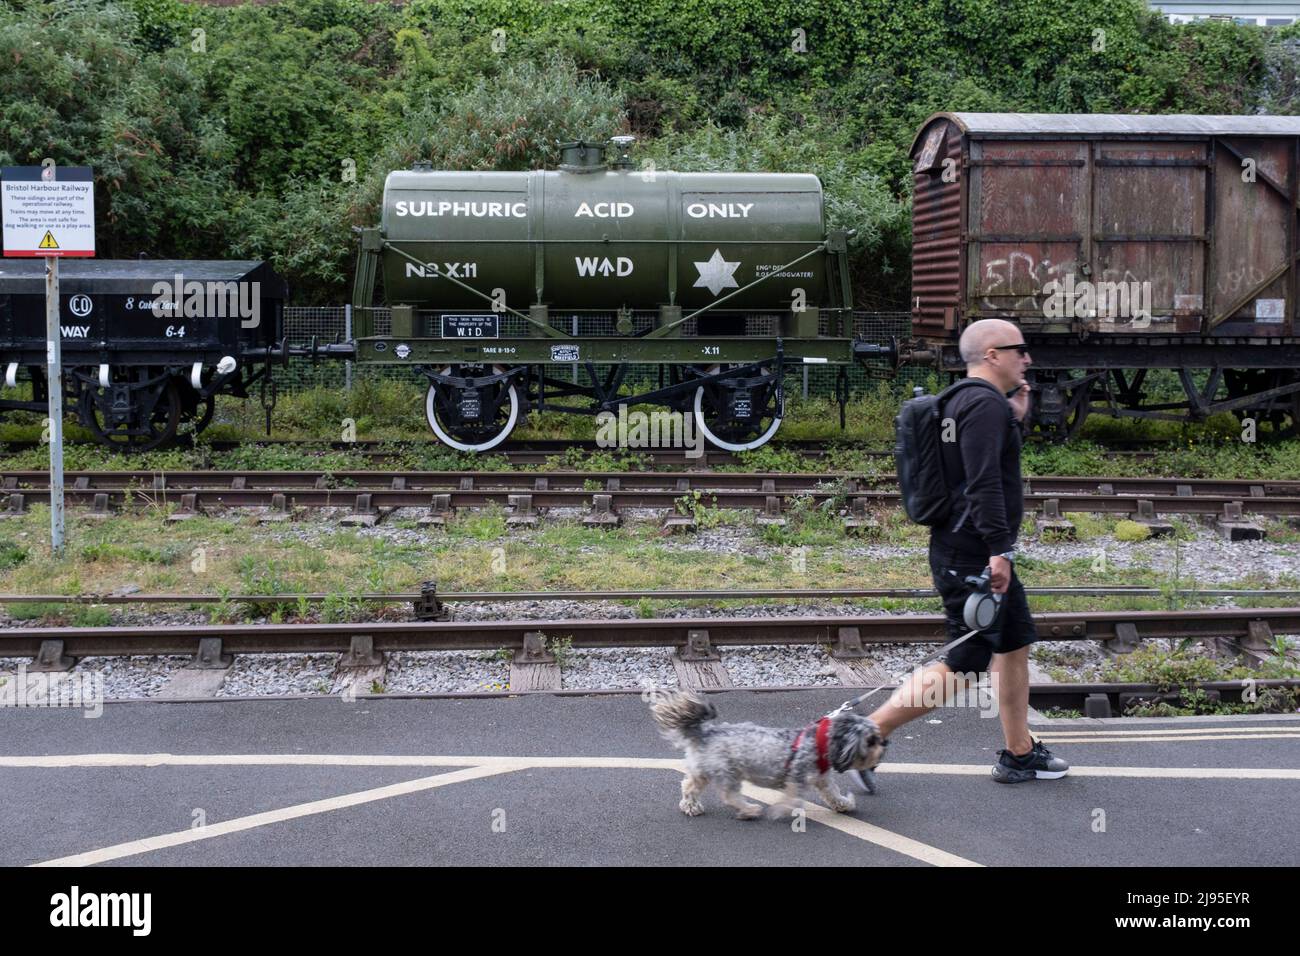 Old railway wagon designed to carry sulphuric acid on Spike Island on 7th May 2022 in Bristol, United Kingdom. Stock Photo